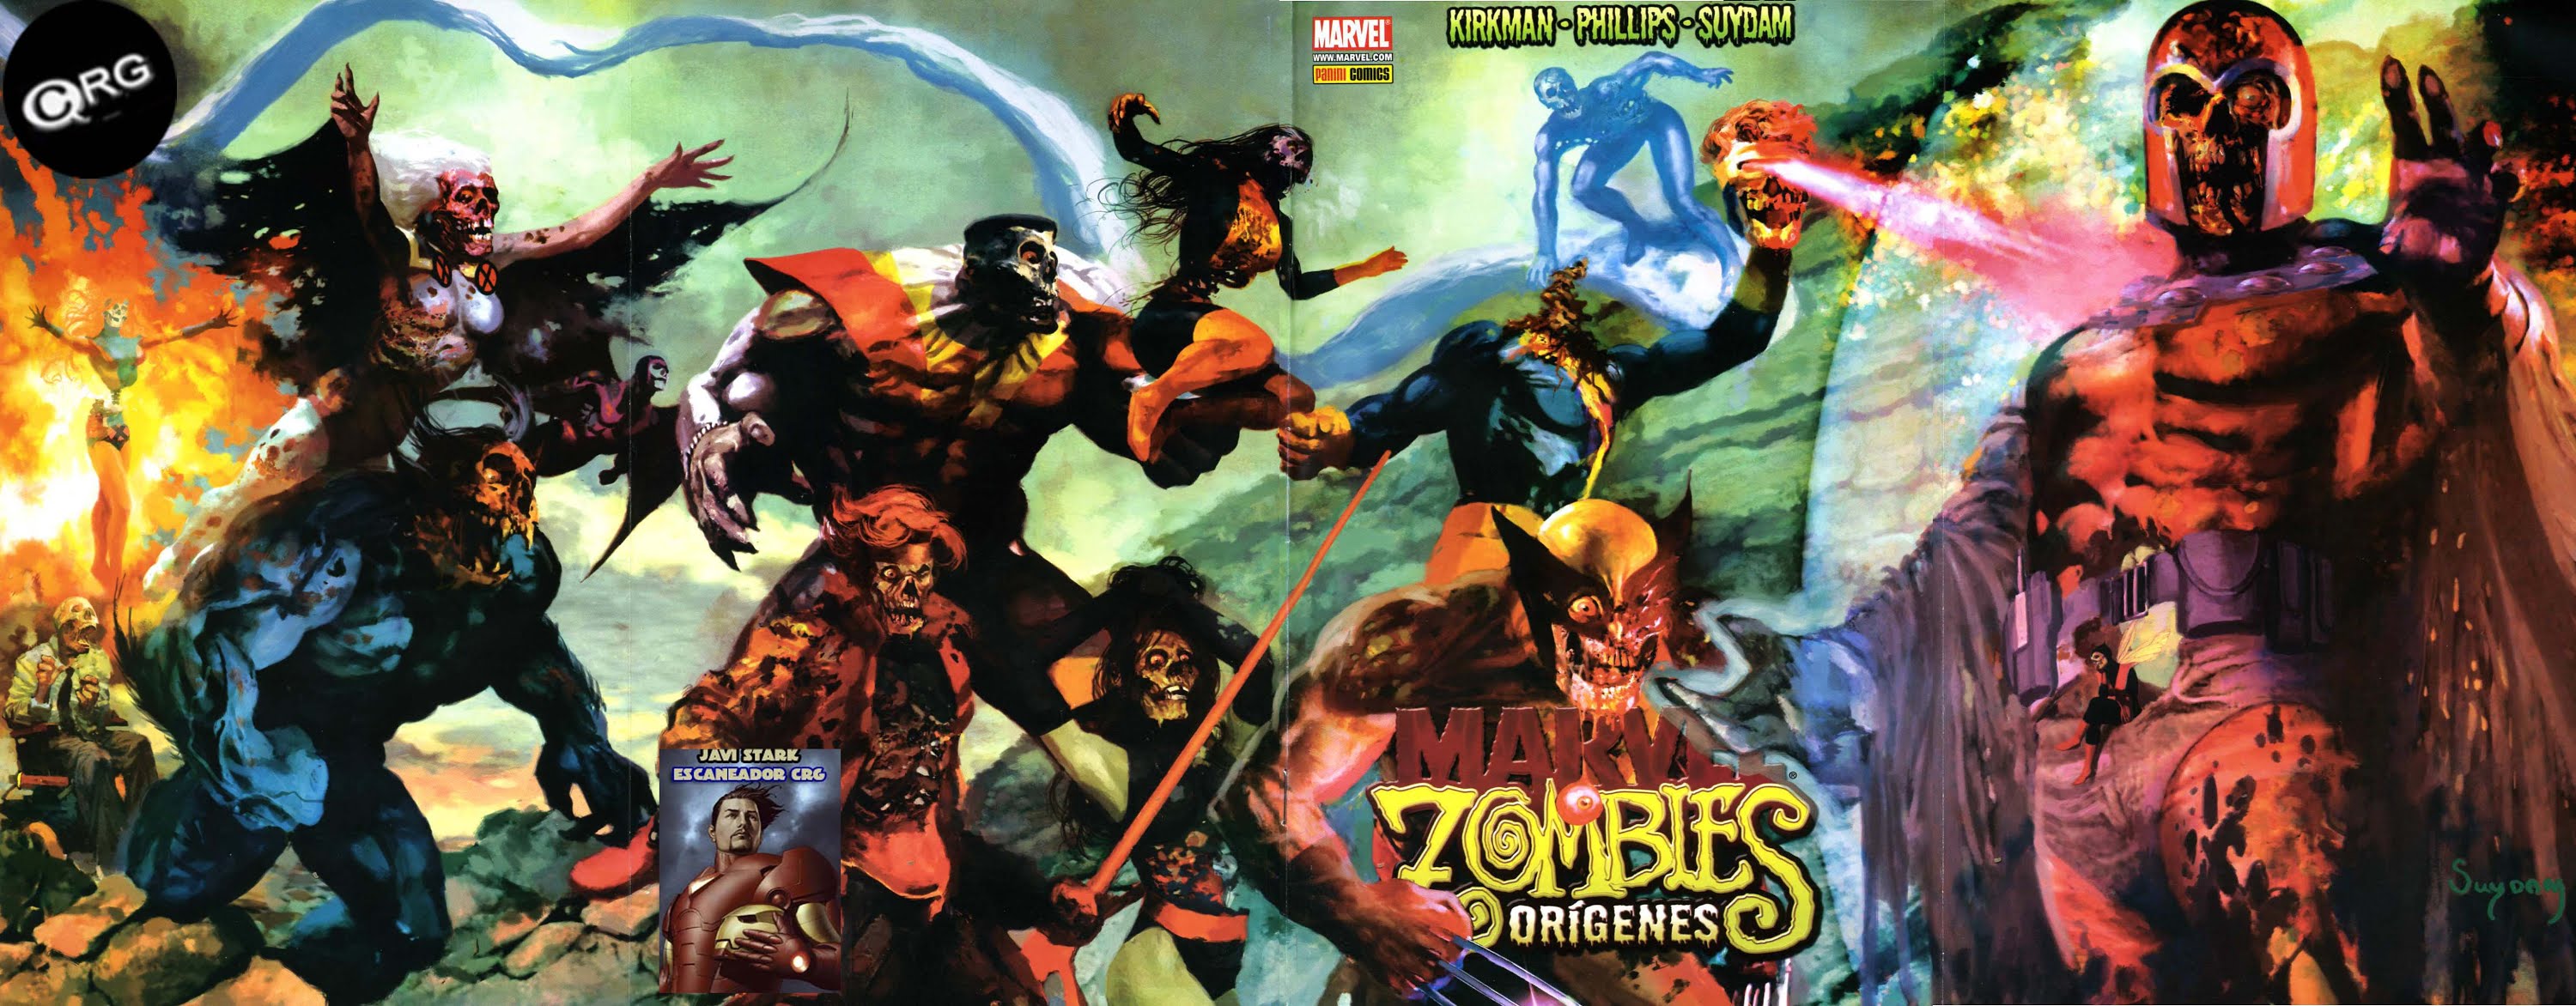 HQ Marvel Zombies: Dead Days Wallpapers | File 530.44Kb